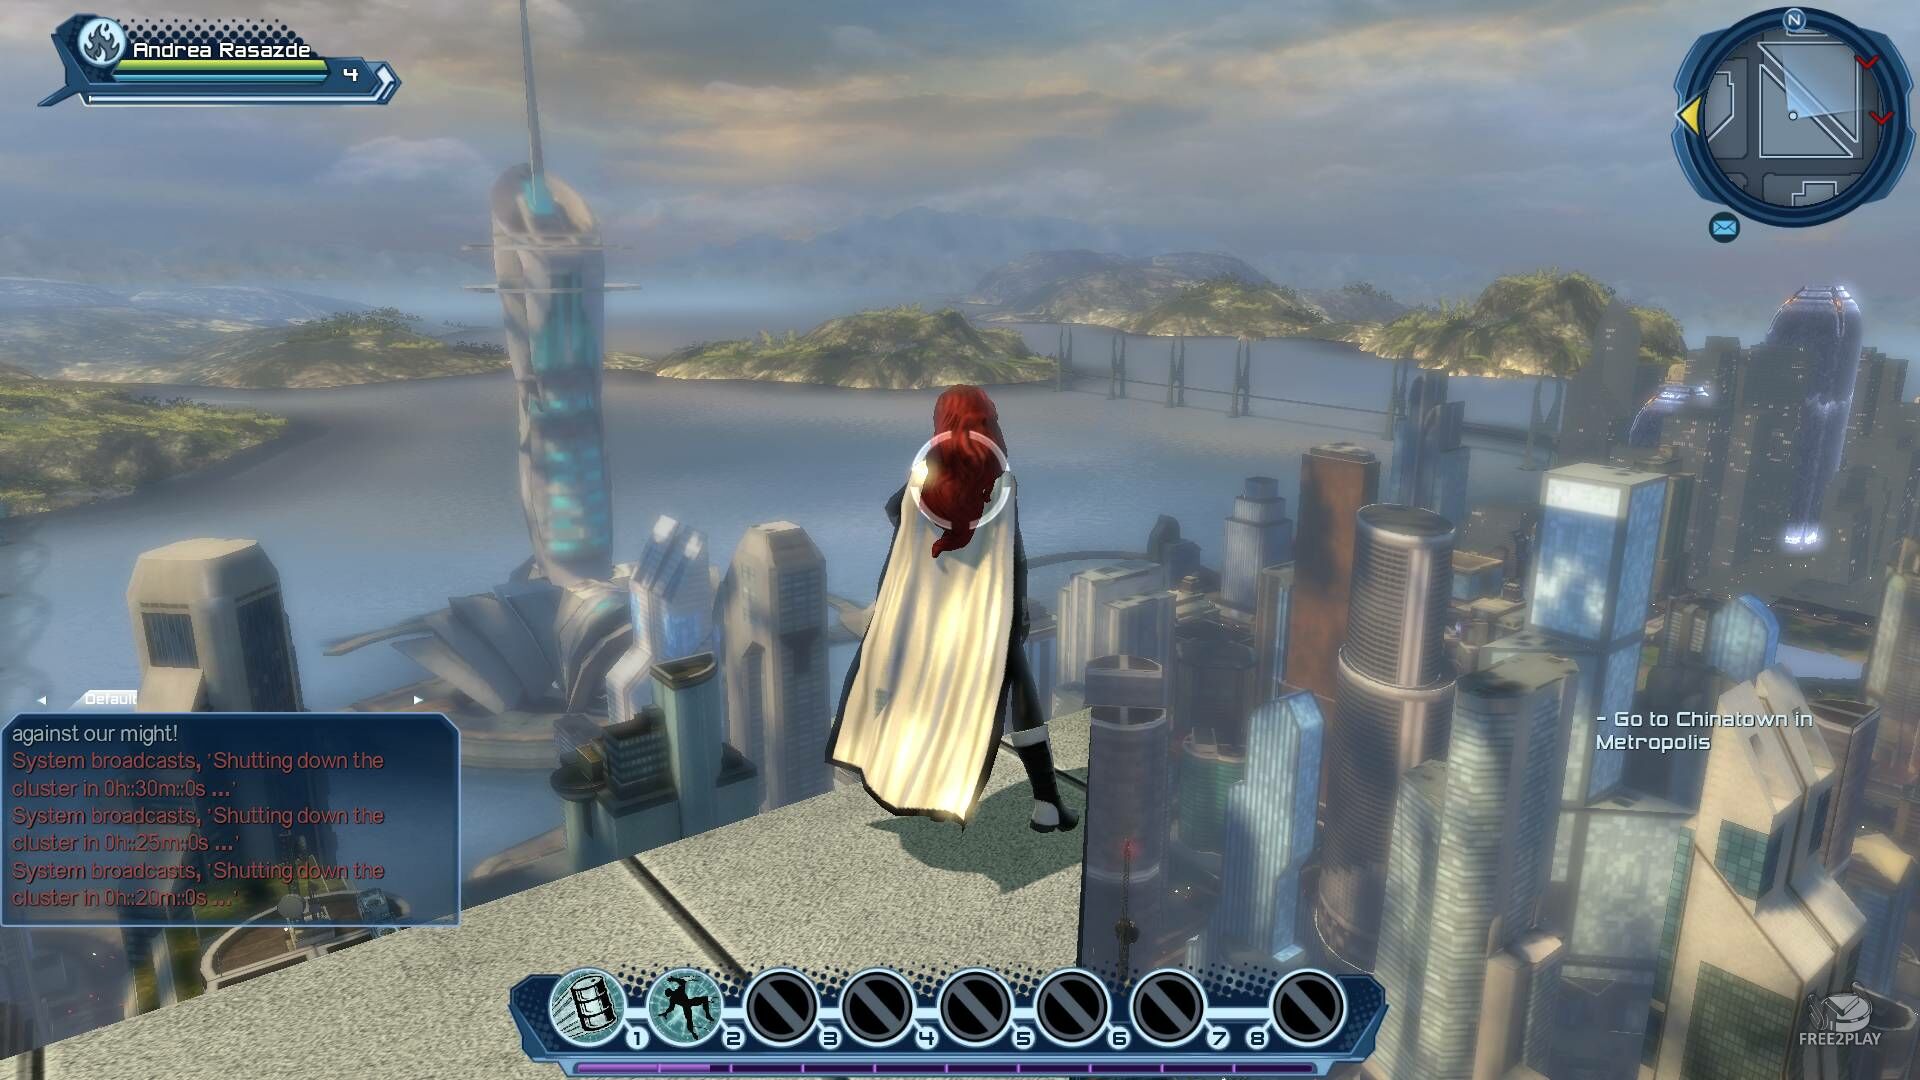 DC Universe Online - PS4 1080P Free To Play Game / 1st Time Playing 